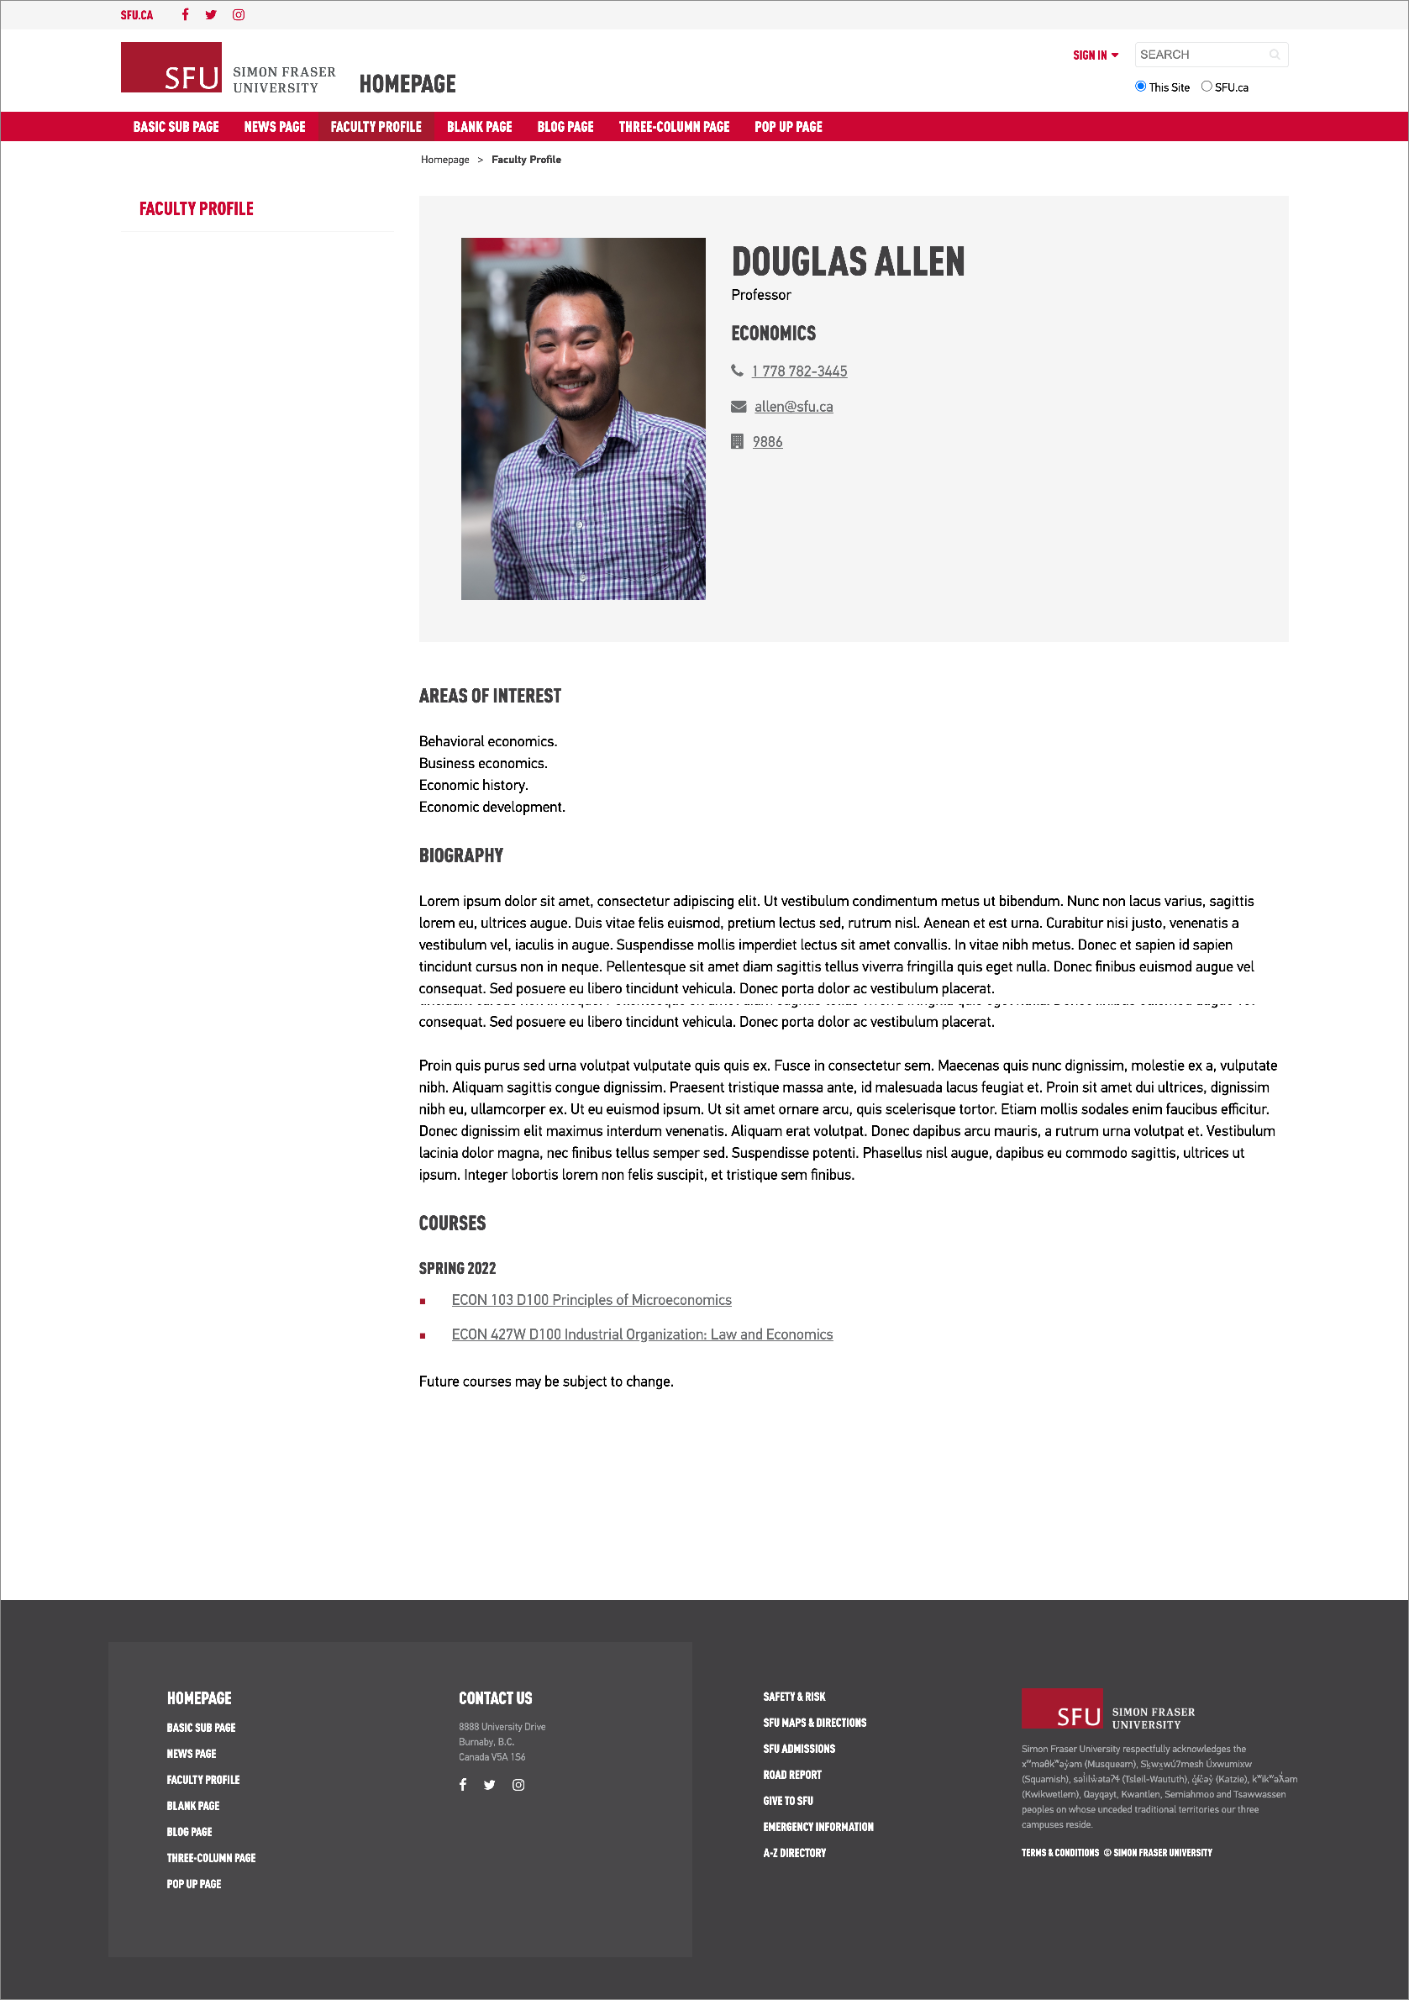 This is an image of a faculty profile page example